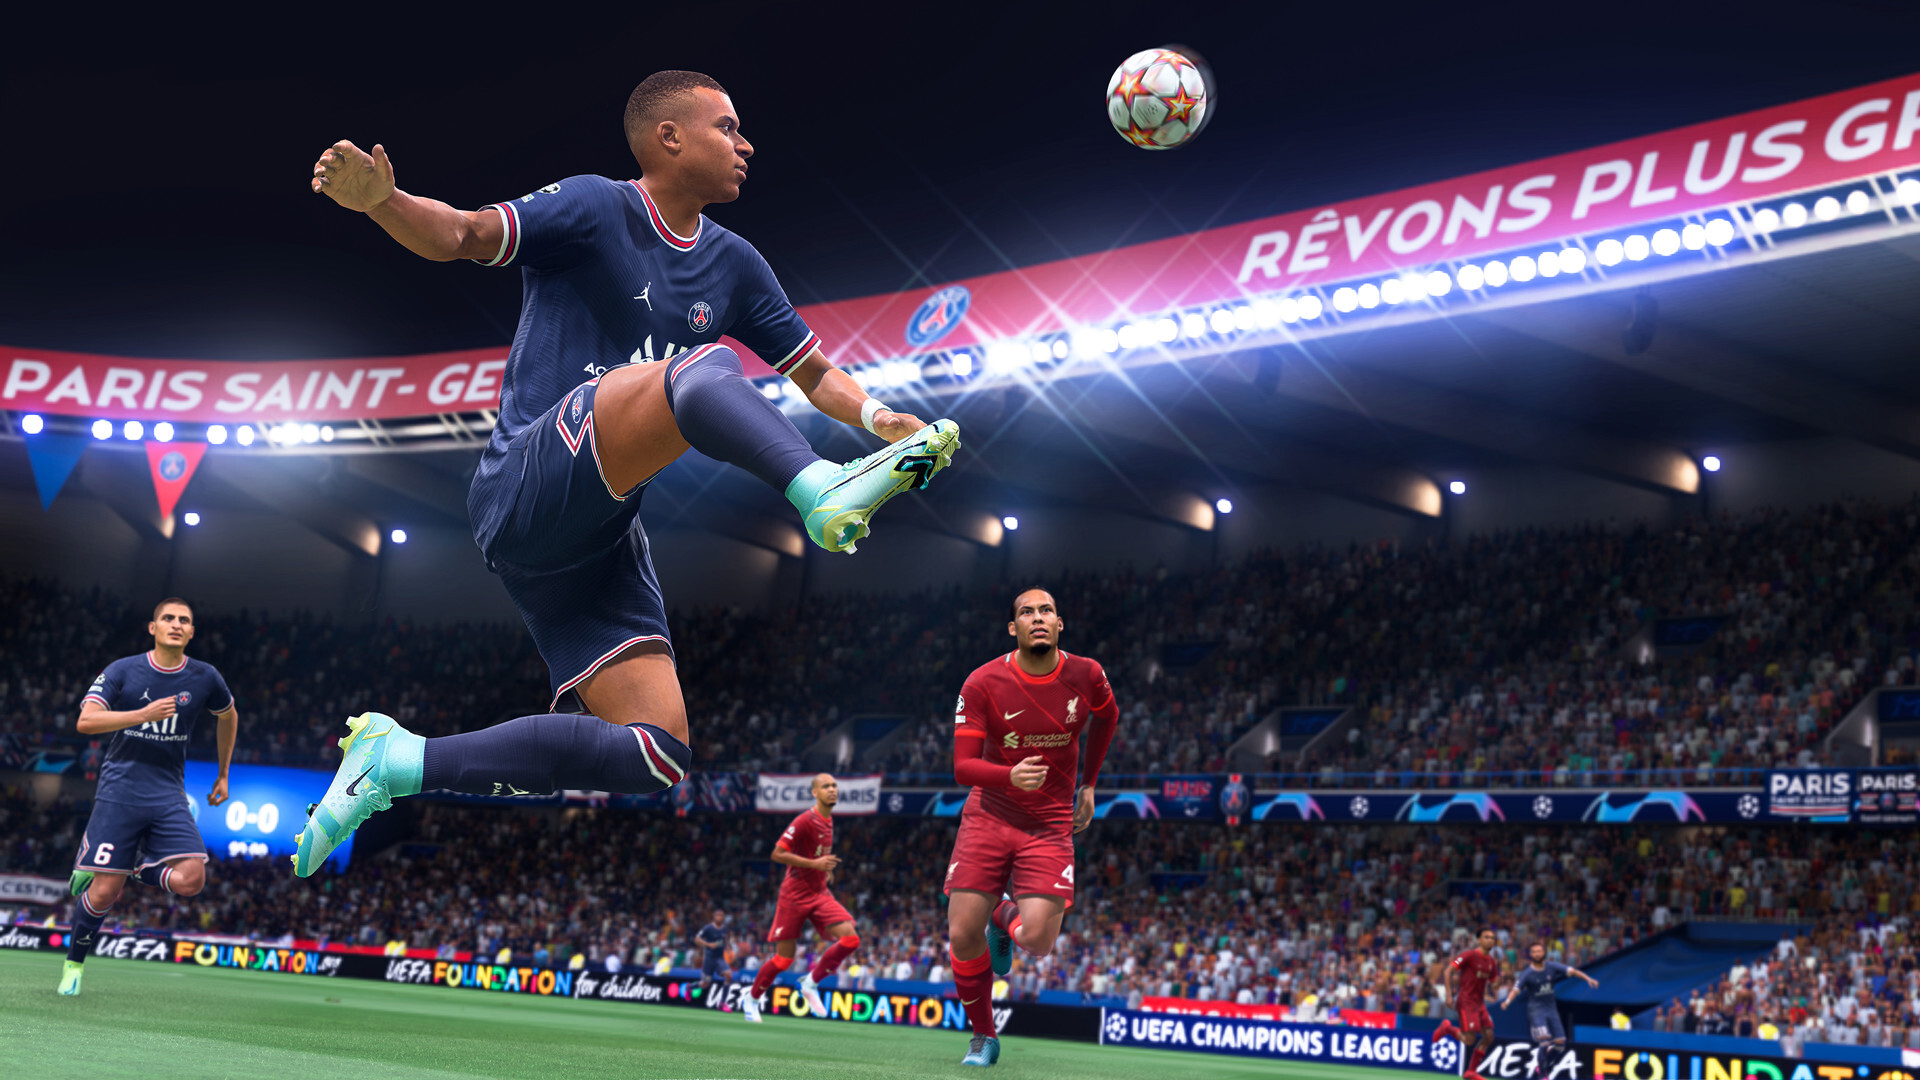 FIFA 22 (PC) key for Steam - price from $2.97